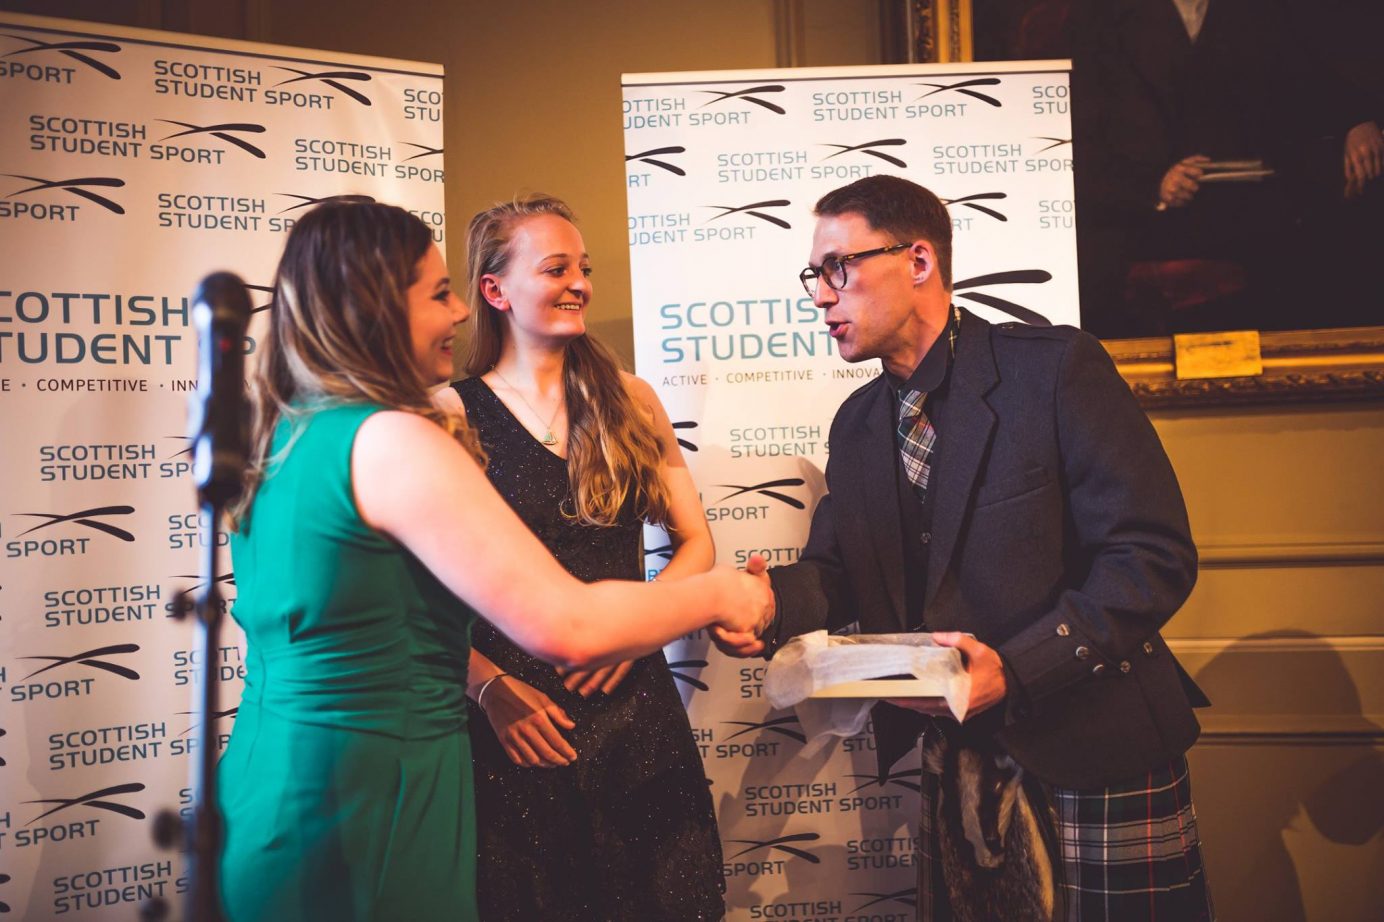 Scottish Student Sport Chair Pete Burgon awarding two female students with a box and shaking their hand. Behind them are two white Scottish Student Sport pull up banners with blue writing